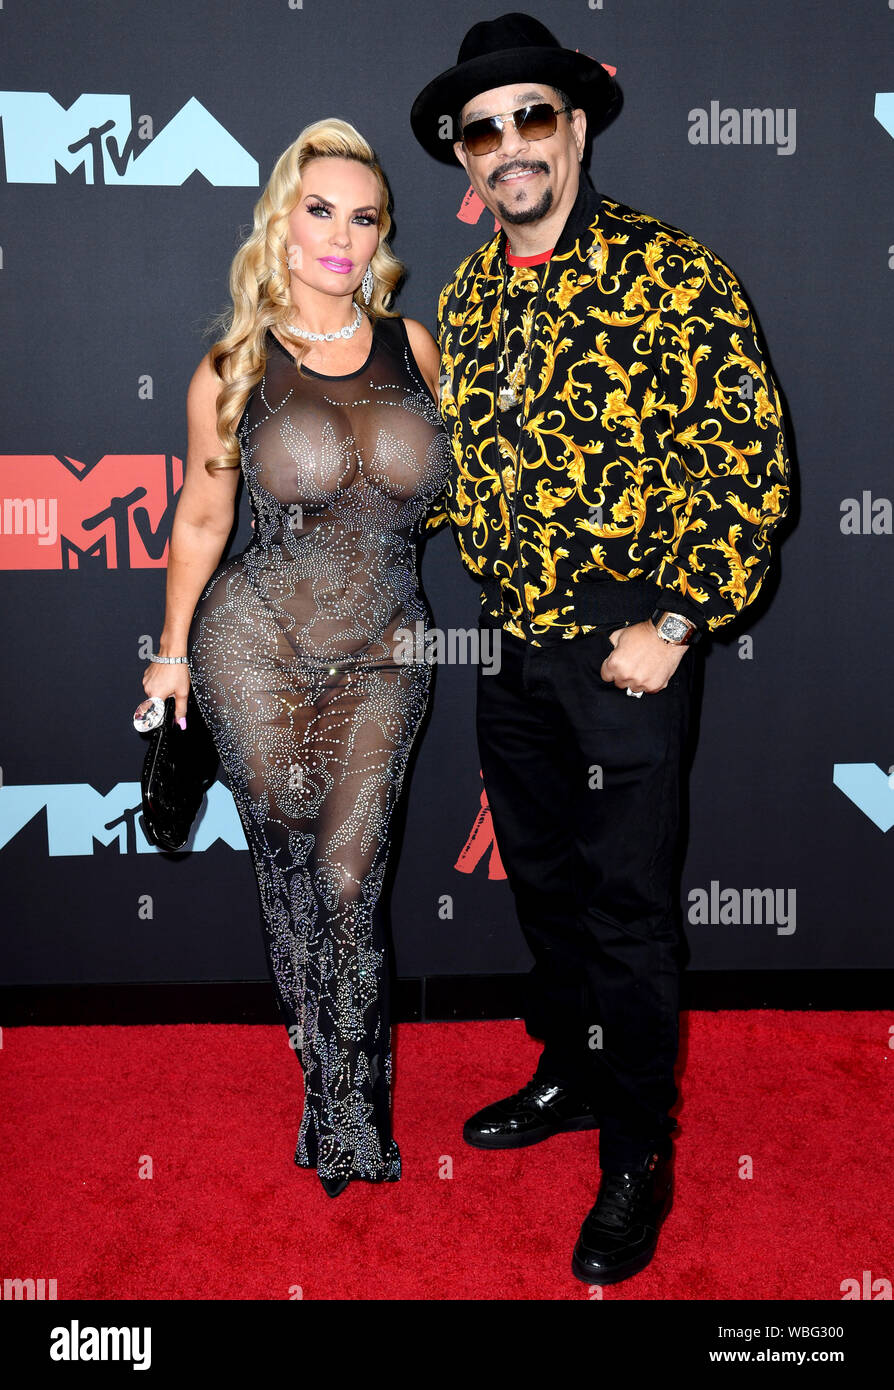 Coco Austin and Ice-T attending the MTV Video Music Awards 2019 held at the  Prudential Center in Newark, New Jersey Stock Photo - Alamy